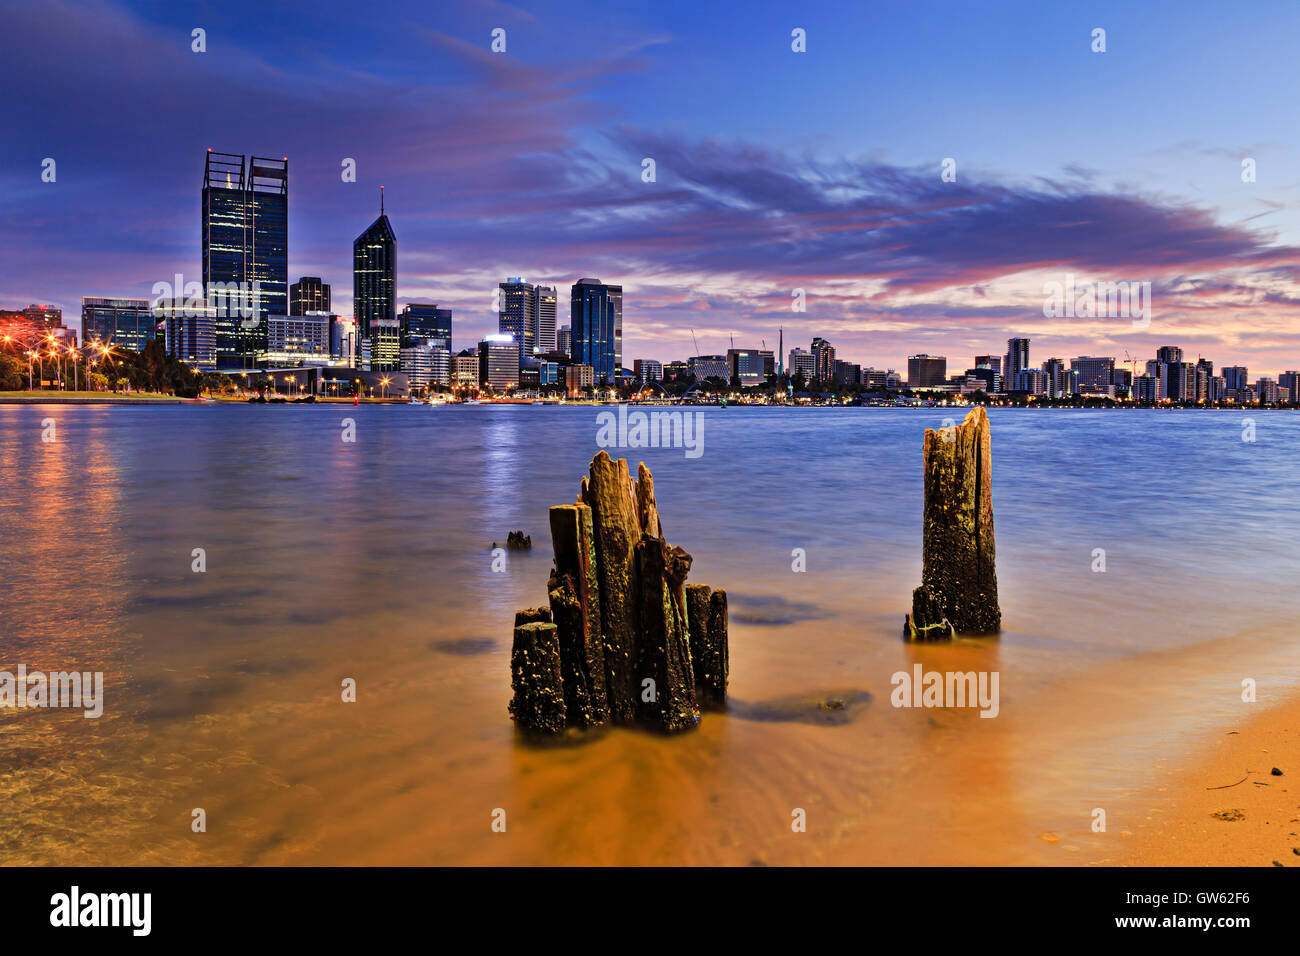 Western Australia capital city Perth at sunrise across Swan river clear waters from sandy beach to CBD. Stock Photo